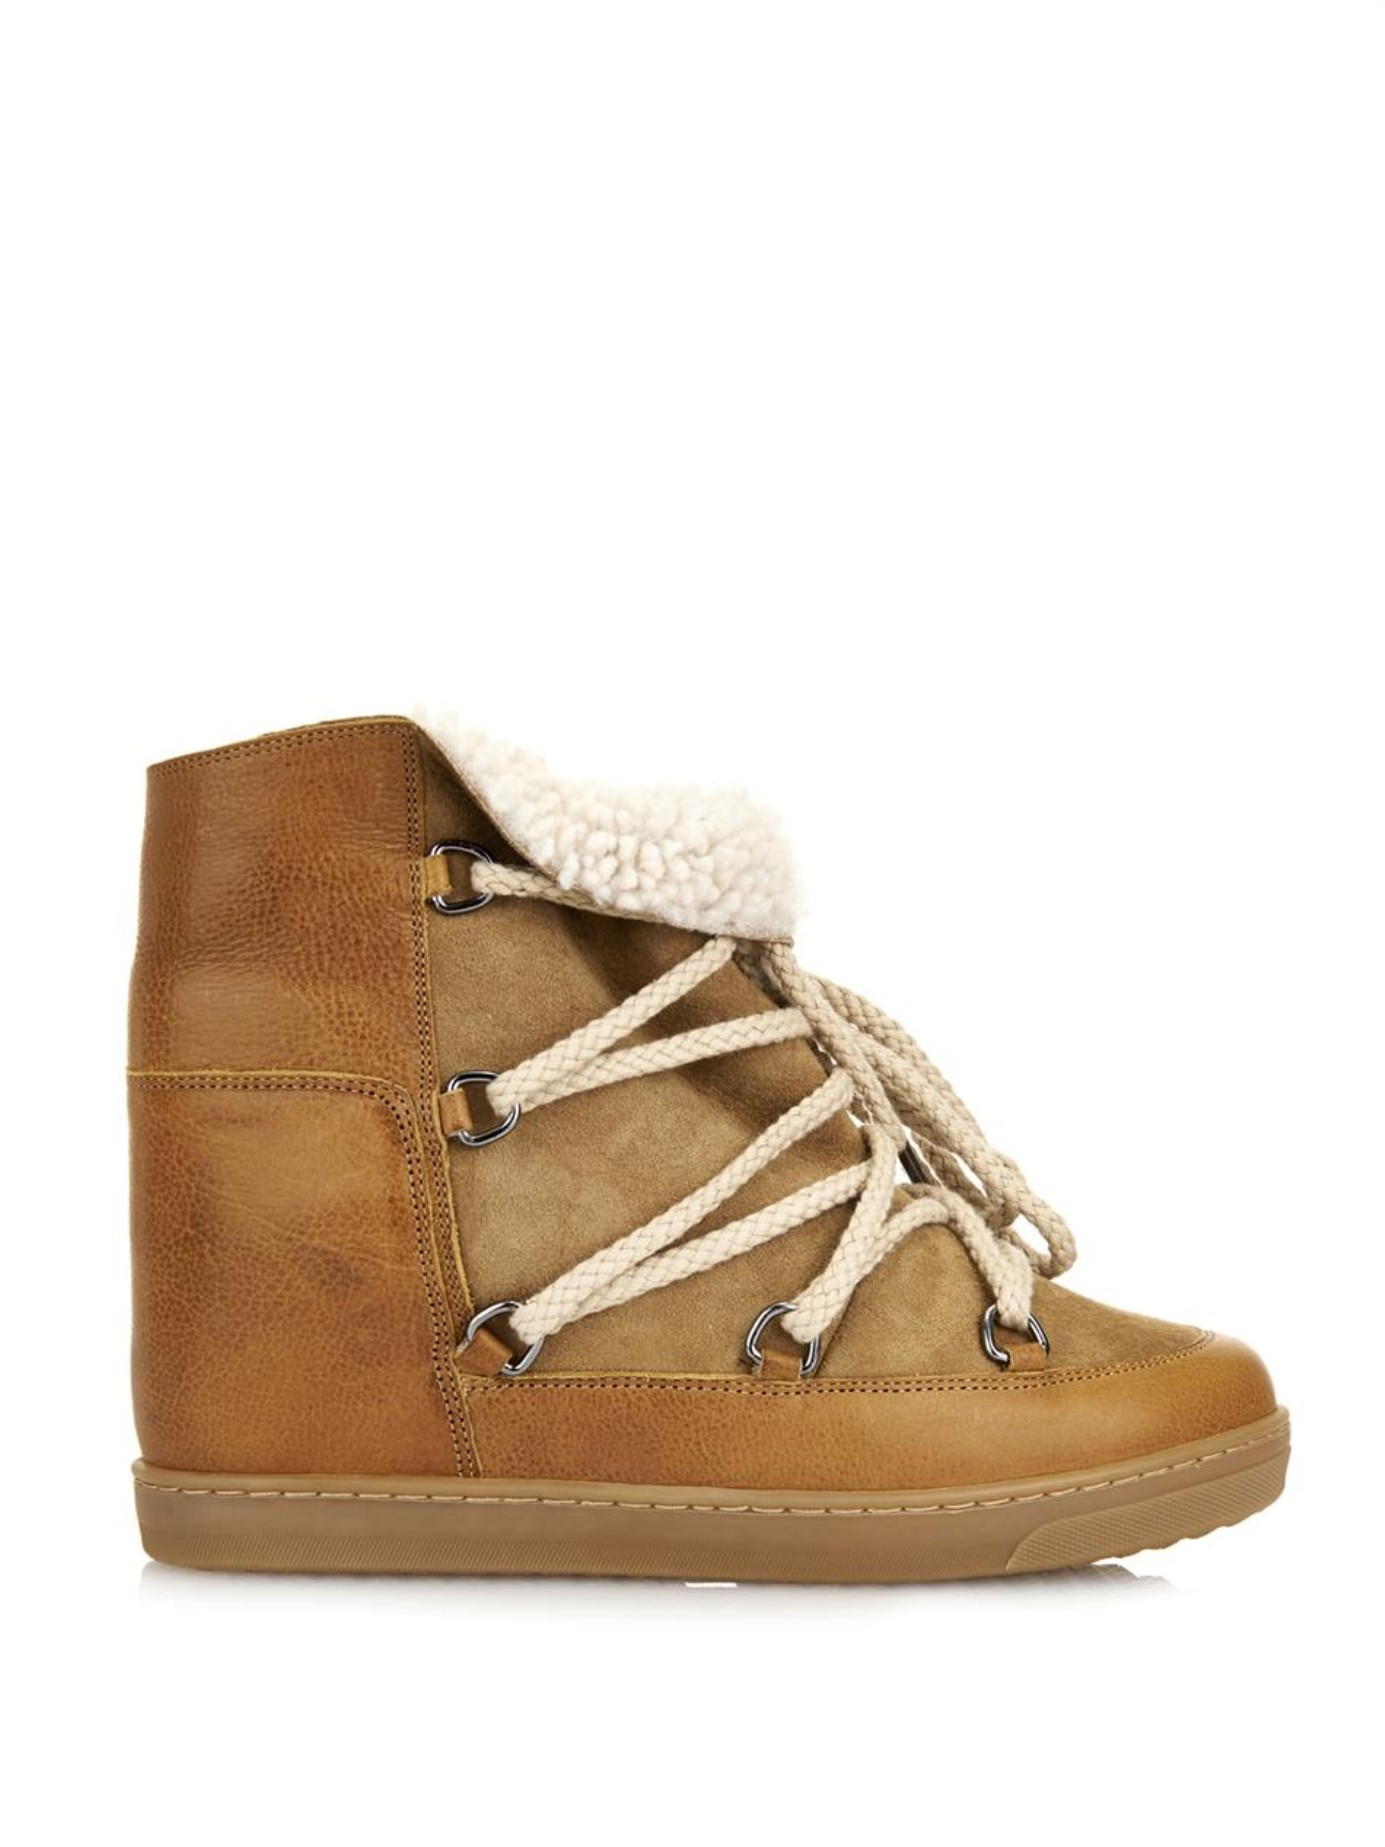 Lyst - Isabel Marant Pietra Fur And Leather Boots in Natural